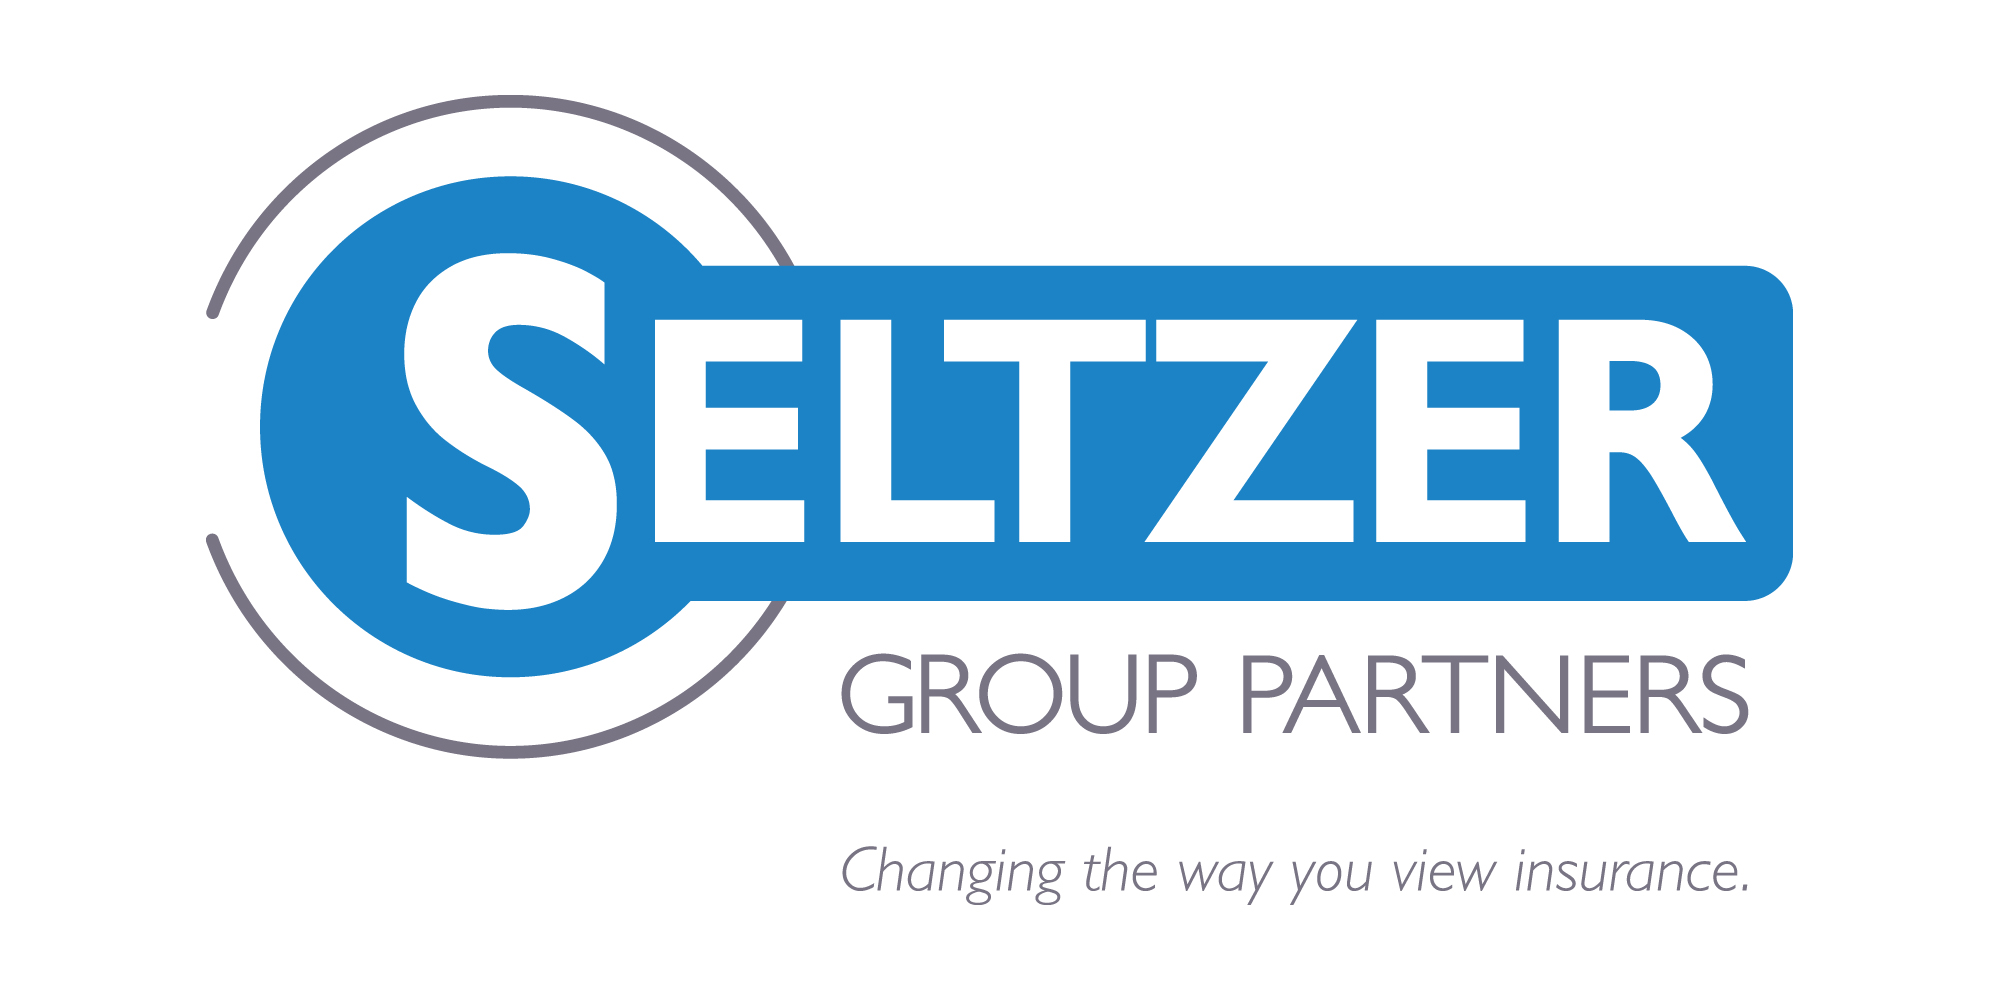 The Seltzer Group Partners